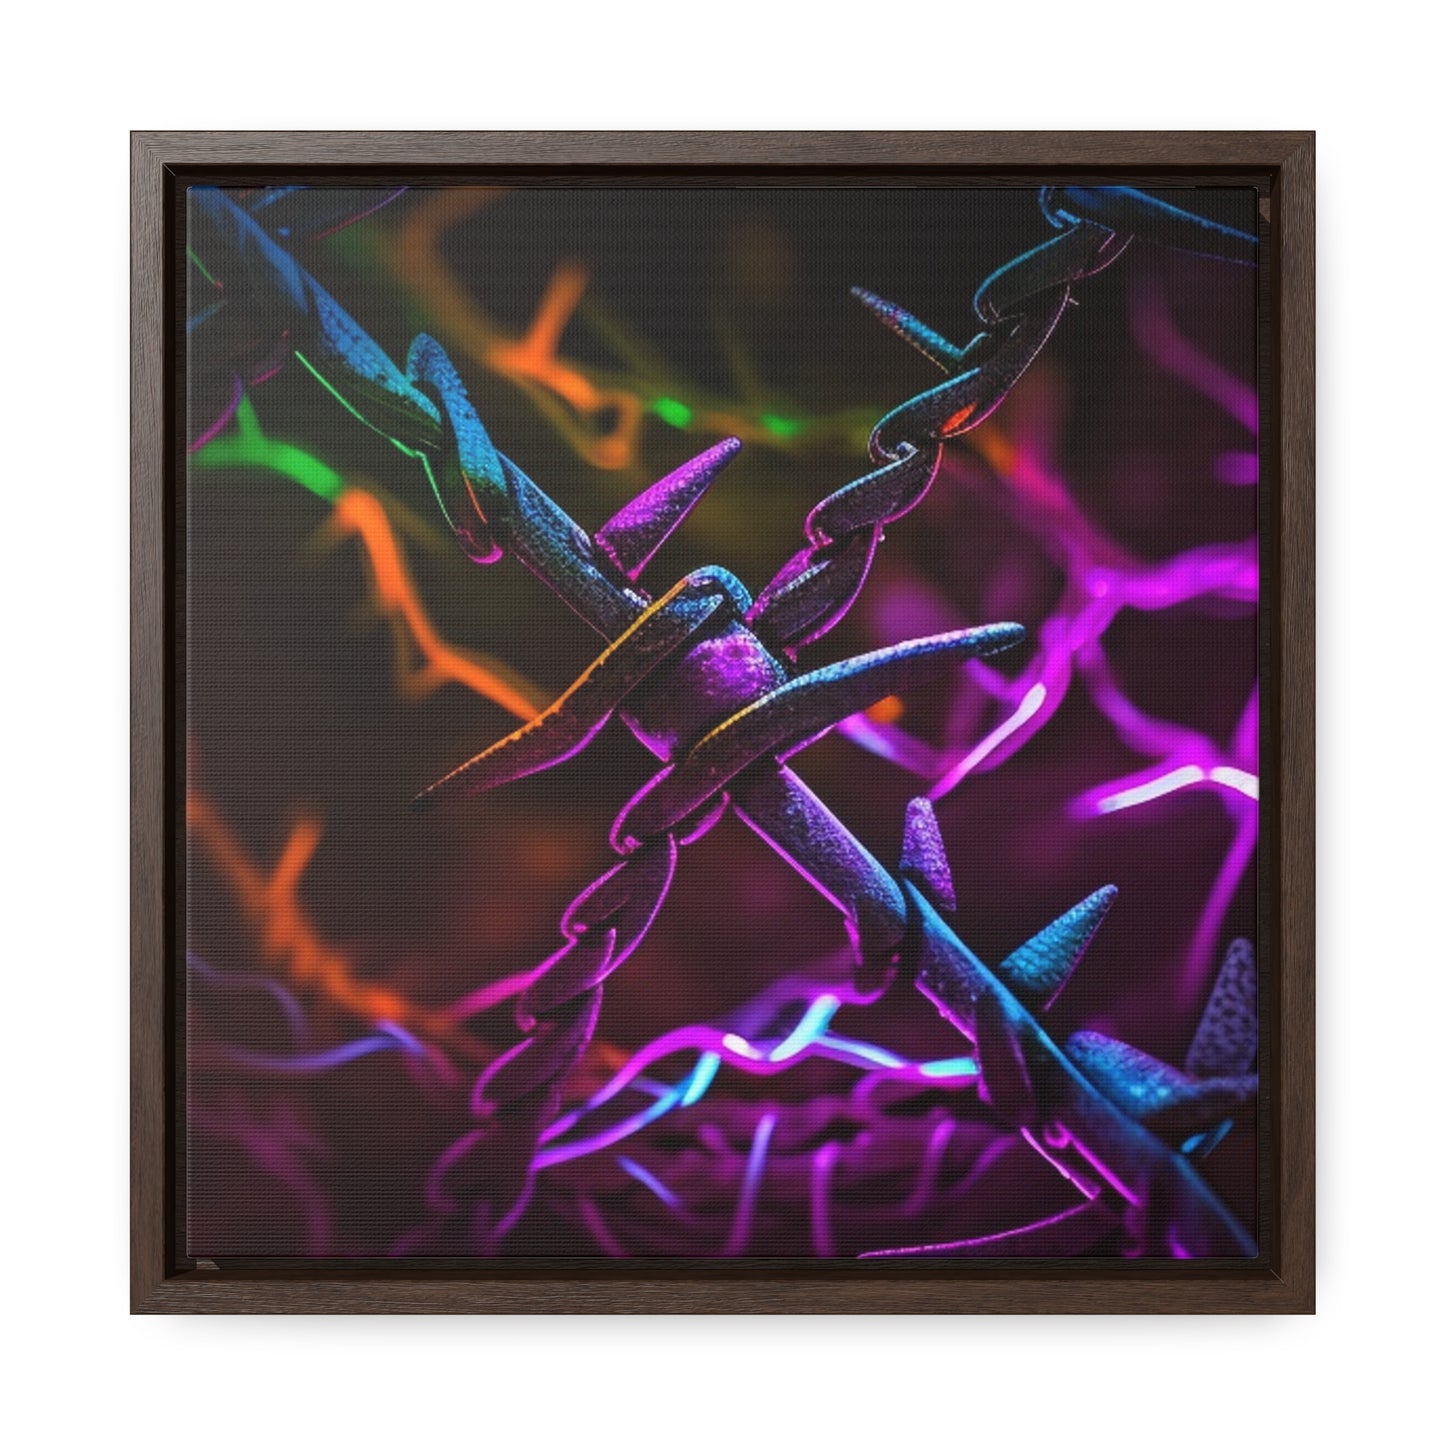 Gallery Canvas Wraps, Square Frame Macro Neon Barb 4